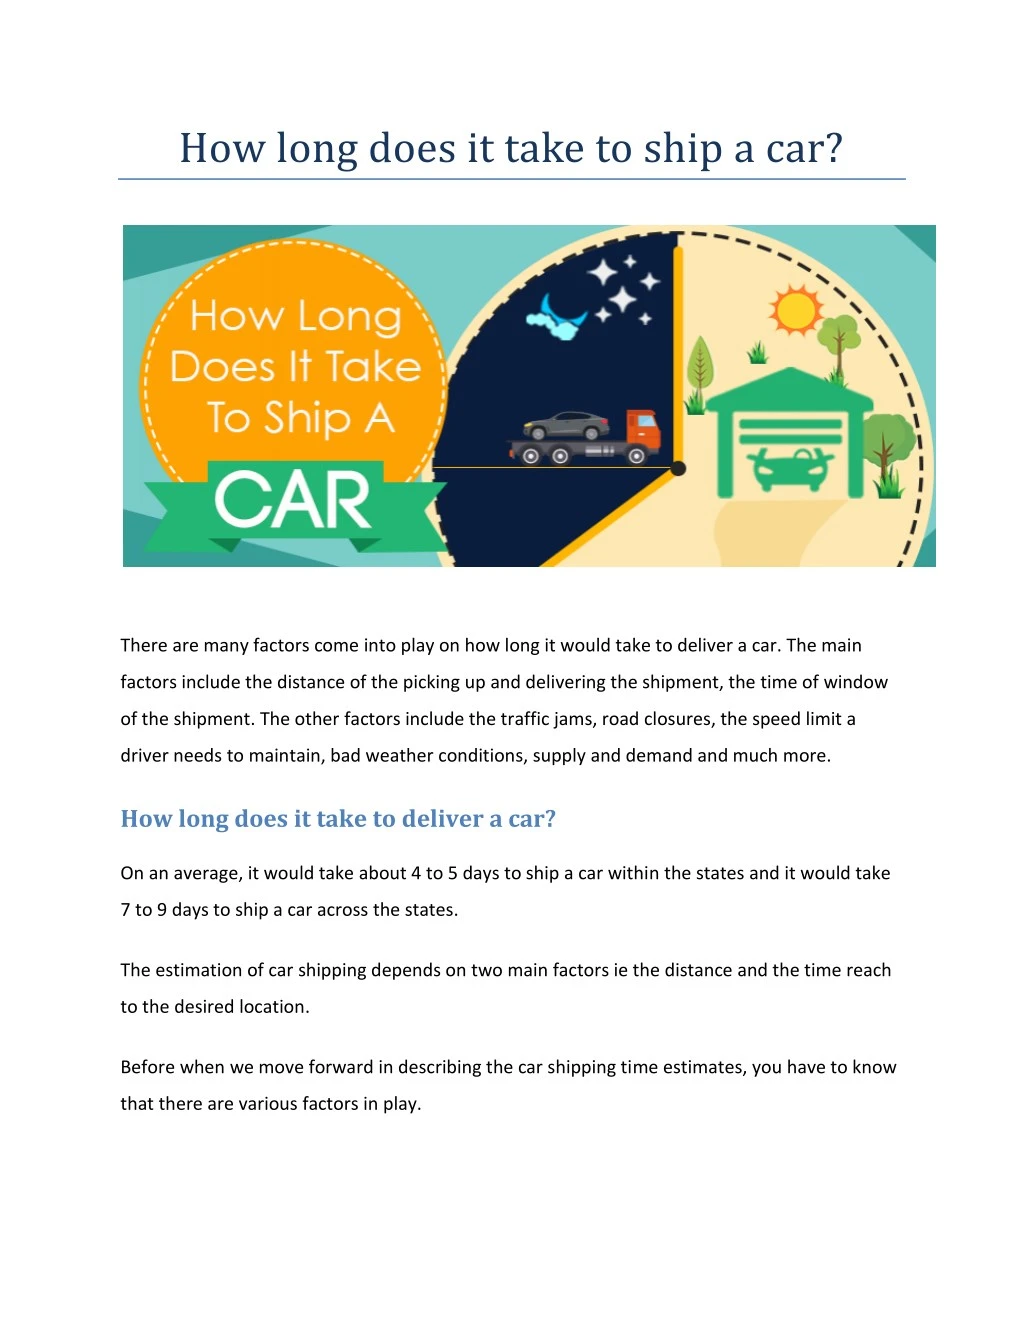 how long does it take to ship a car